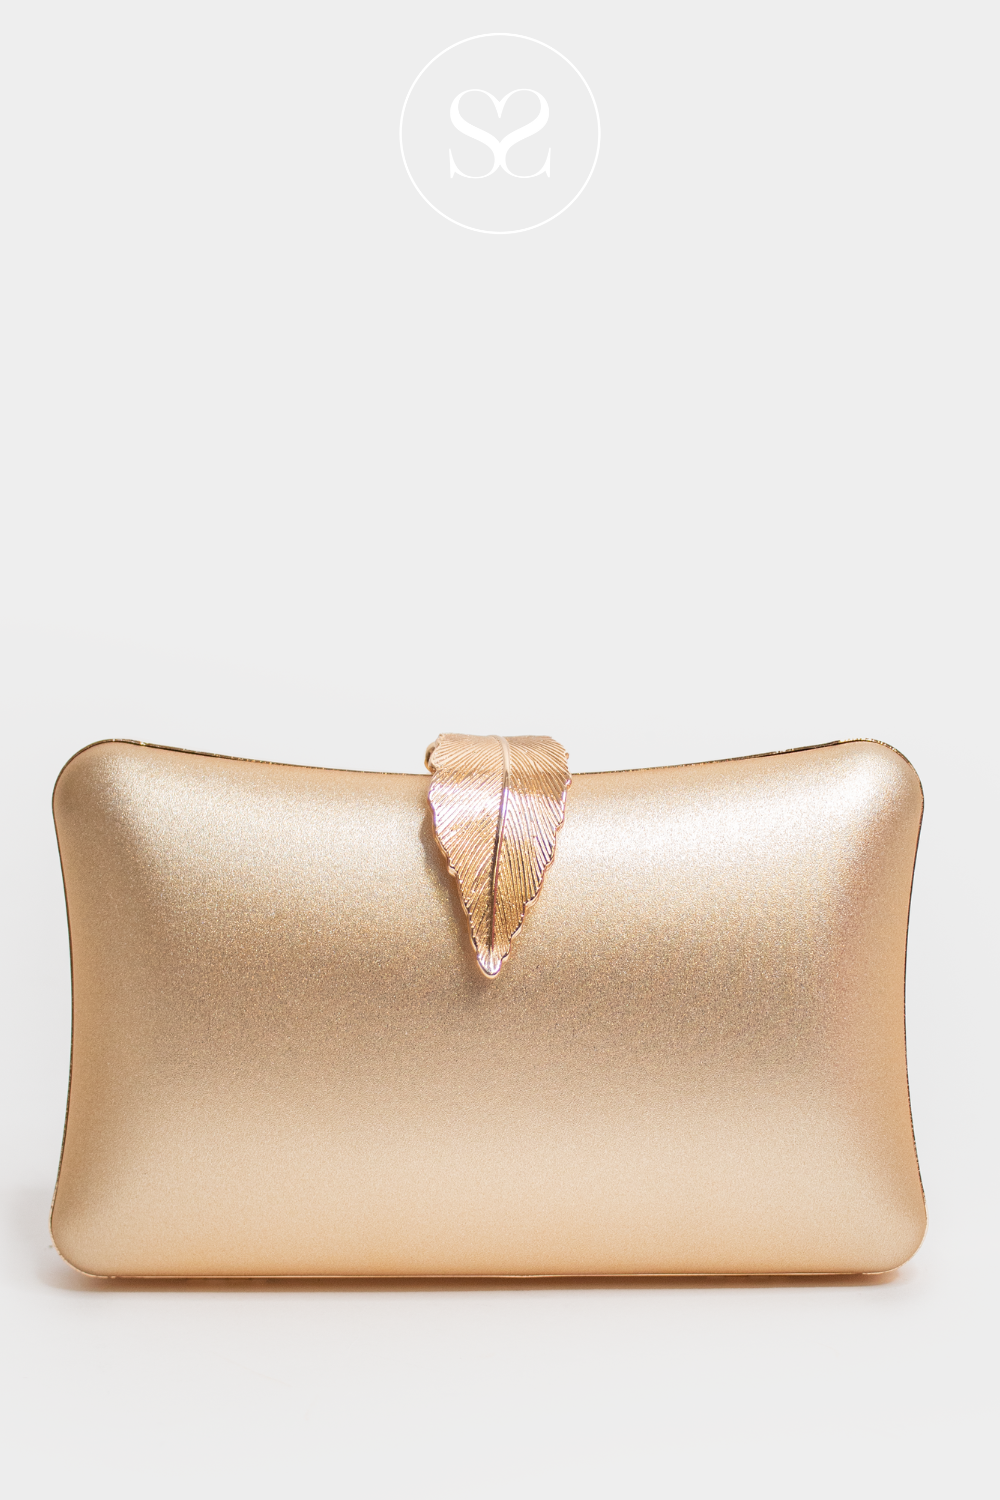 SHENEIL GOLD BOX OCCASSION CLUTCH WITH LEAF CLASP